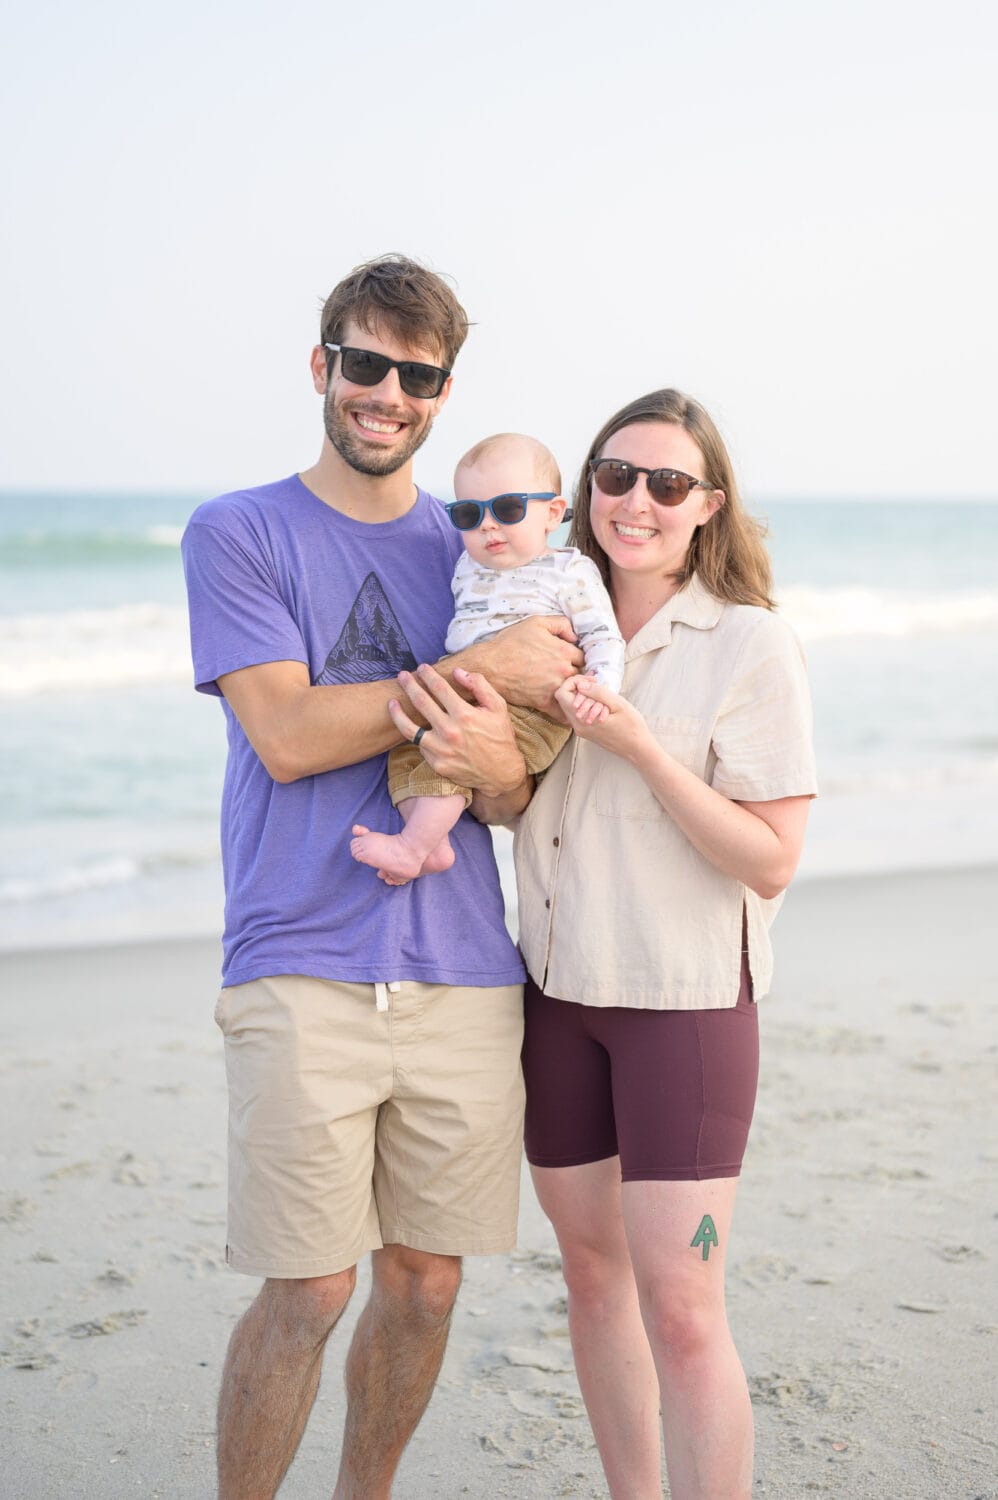 Baby with sunglasses - North Myrtle Beach